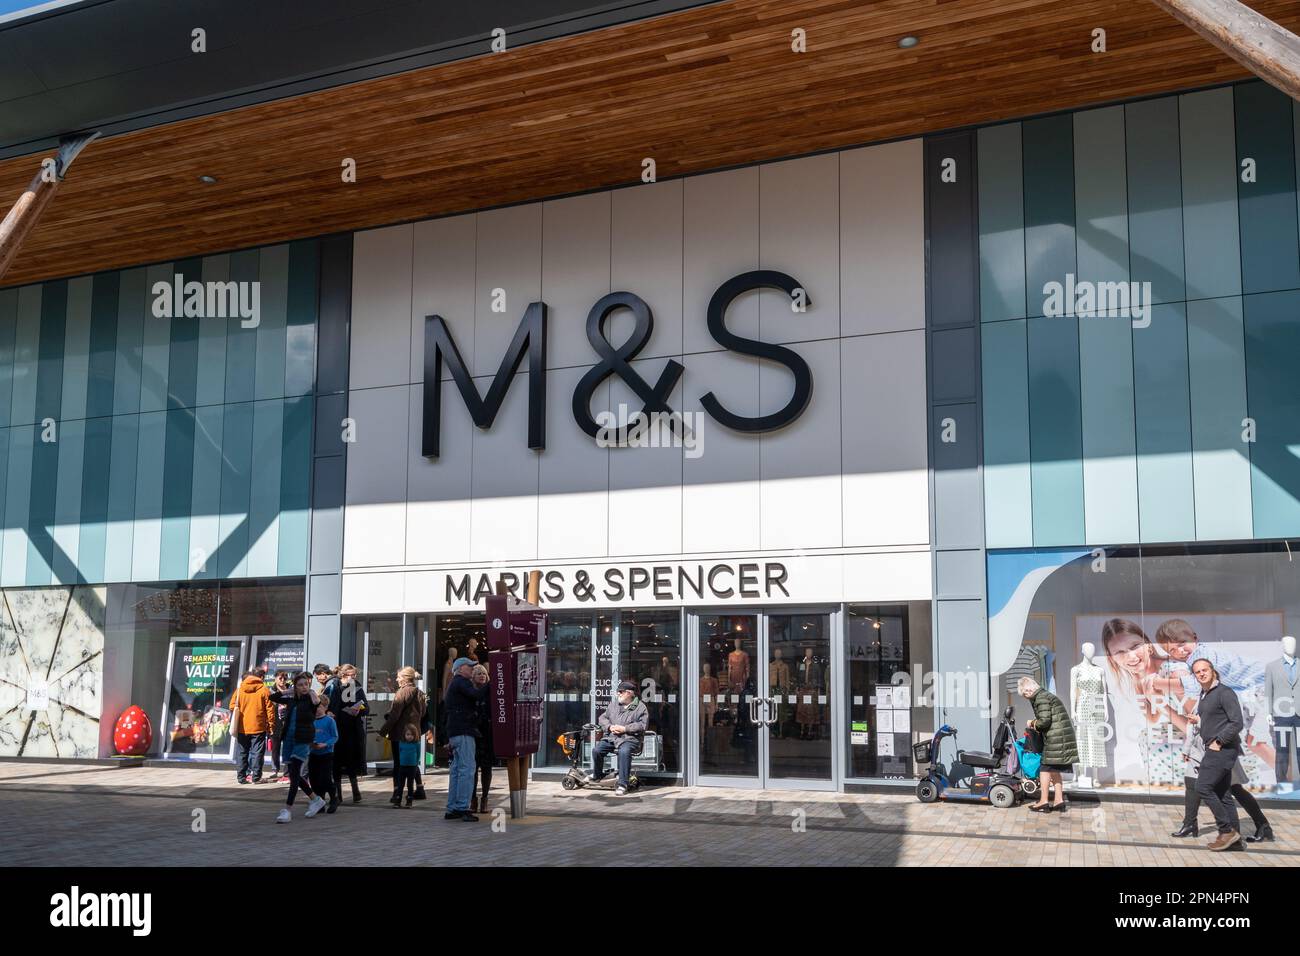 M&S Marks & Spencer shop front in the Lexicon Centre, Bracknell town centre, Berkshire, England, UK, with shoppers outside Stock Photo